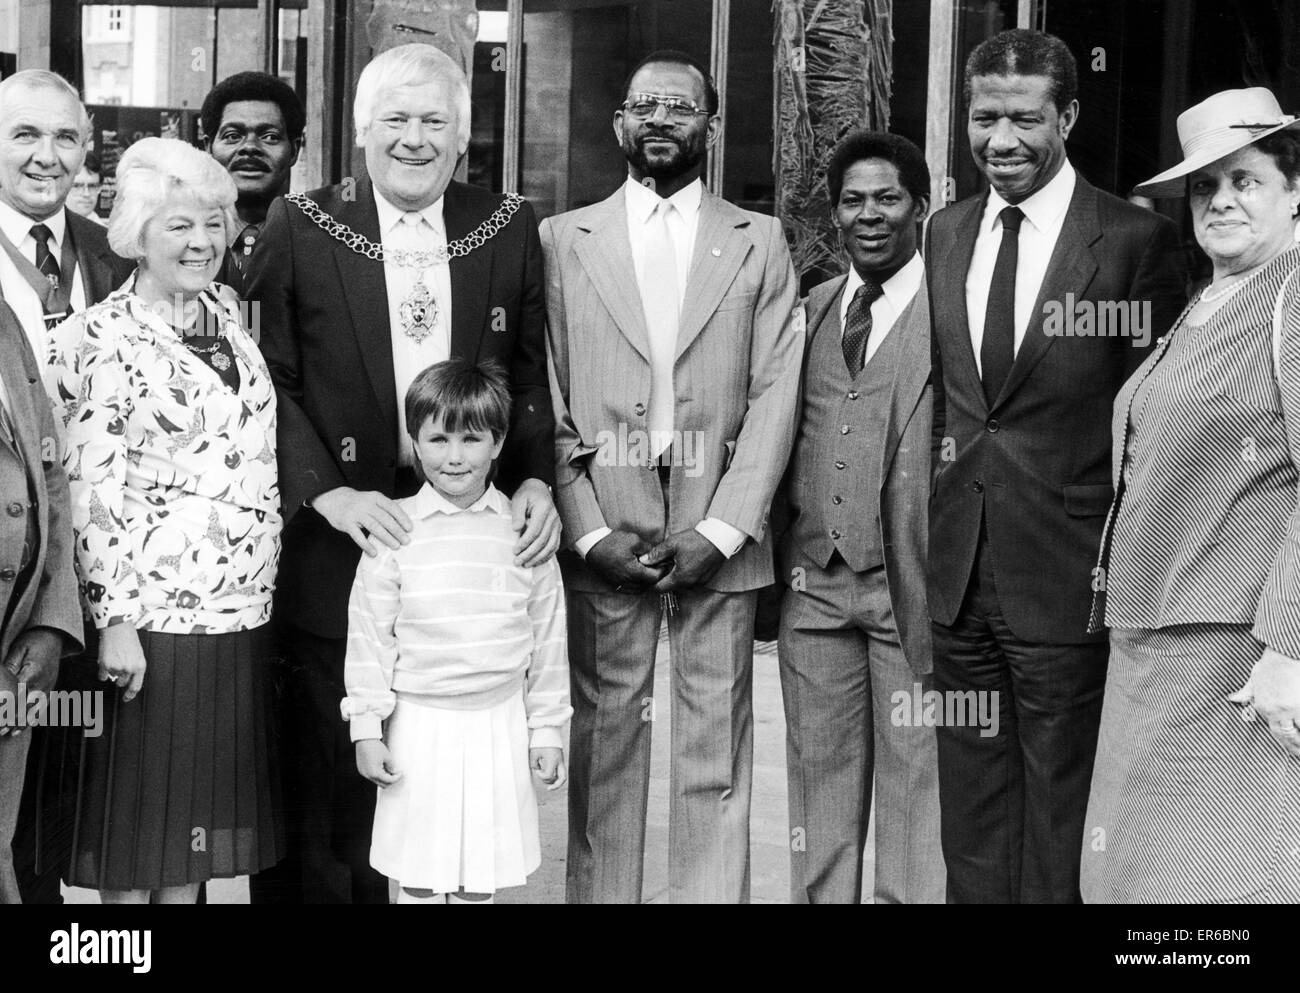 Jamaican High Commissioner Herbert Walker and his wife (right) are welcomed to Coventry Cathedral by West Indian Centre Chairman Eric Linton (centre) and the Civic Party led by the Lord Mayor of Coventry, Councillor Jeff White and his wife, 1st August 198 Stock Photo